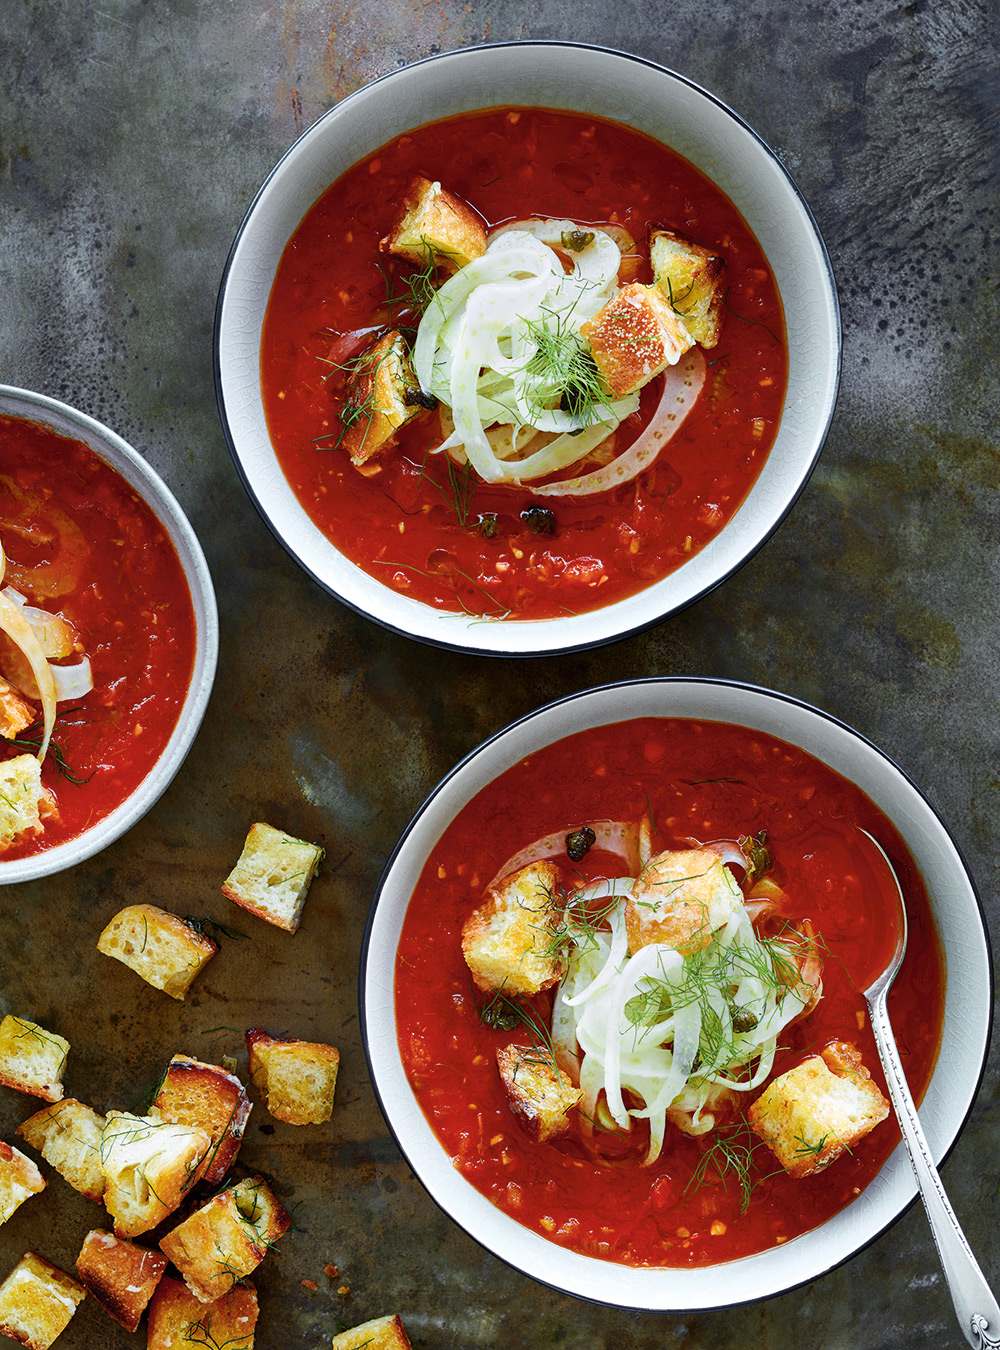 Tomato Soup with Parmesan Croutons and Fennel Salad